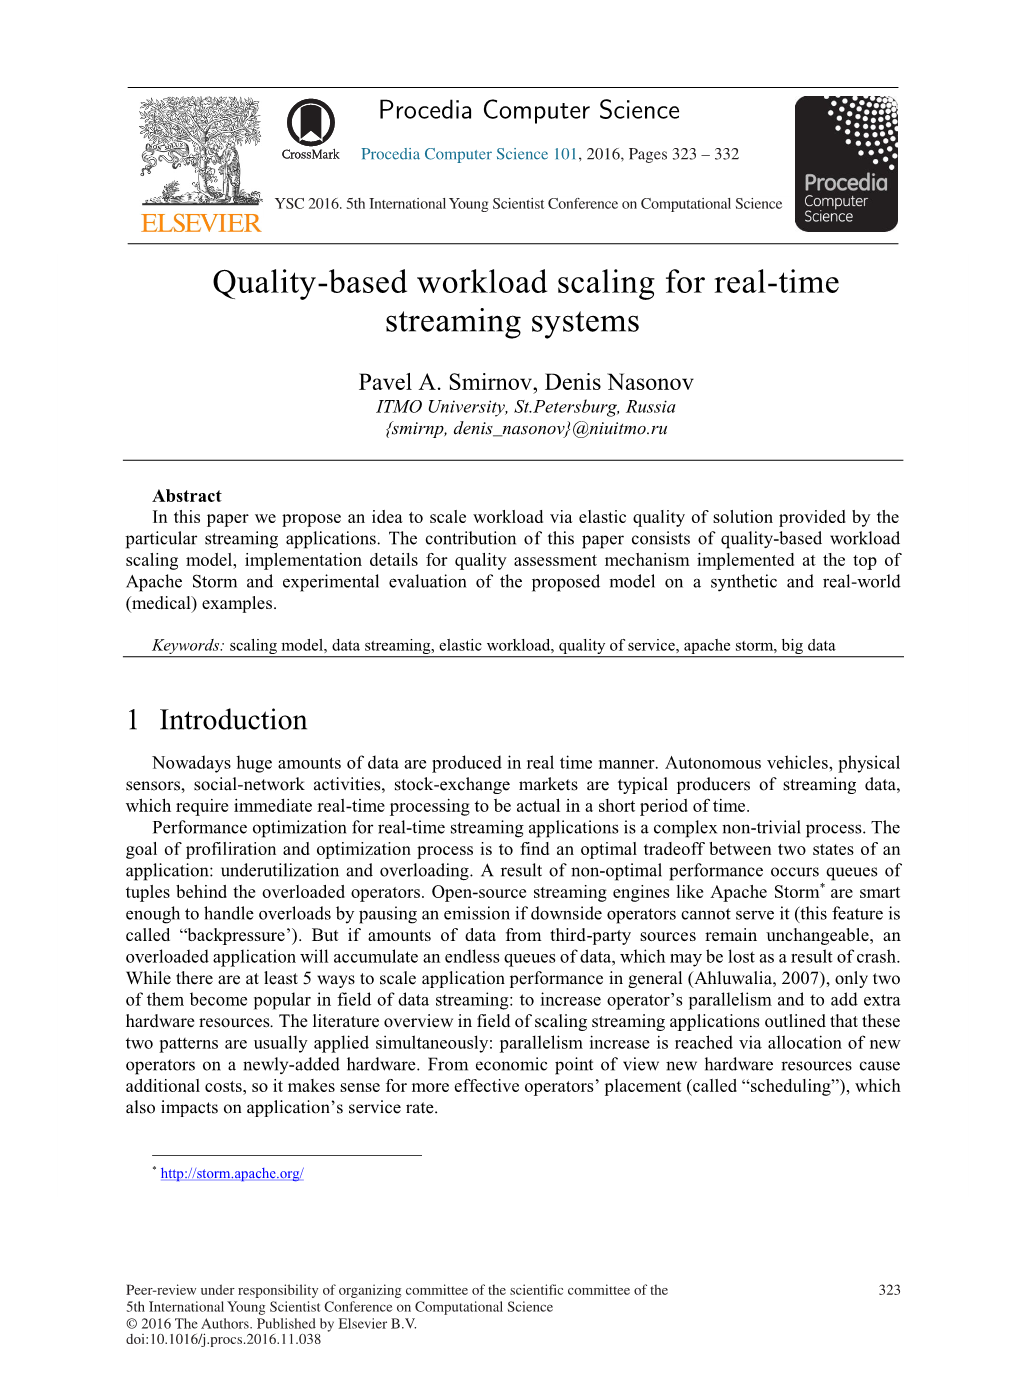 Quality-Based Workload Scaling for Real-Time Streaming Systems